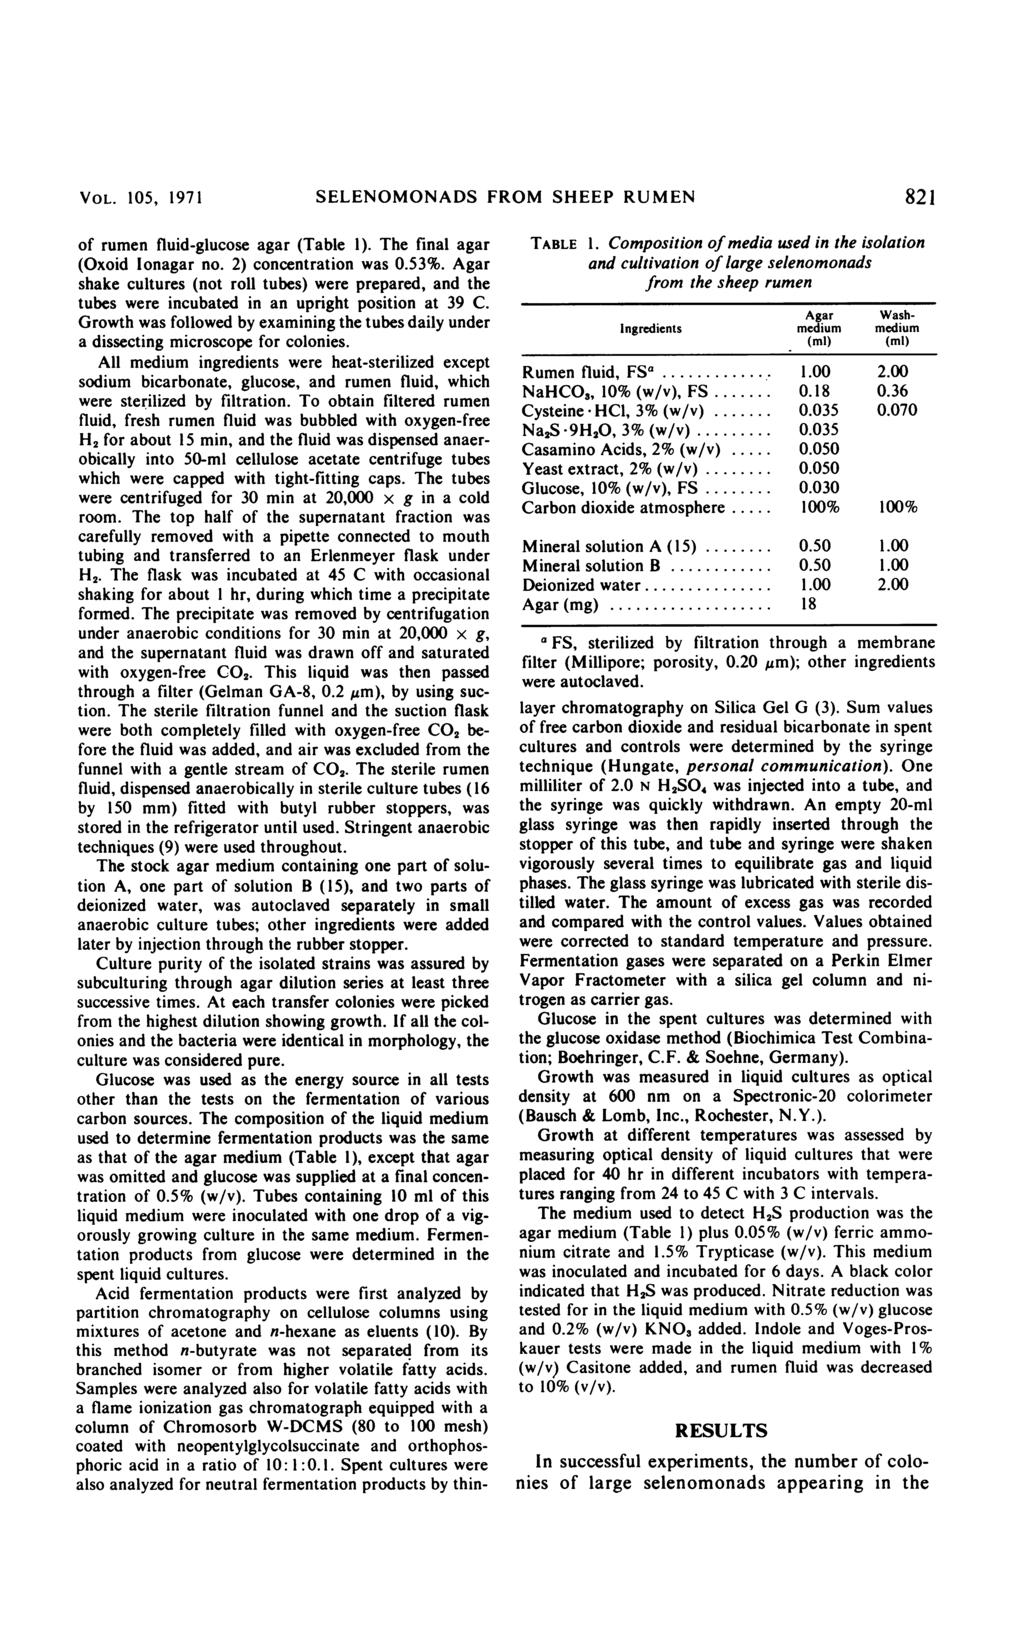 VOL. 105, 1971 SELENOMONADS FROM SHEEP RUMEN 821 TABLE 1. Composition of media used in the isolation and cultivation of large selenomonads from the sheep rumen of rumen fluid-glucose agar (Table 1).